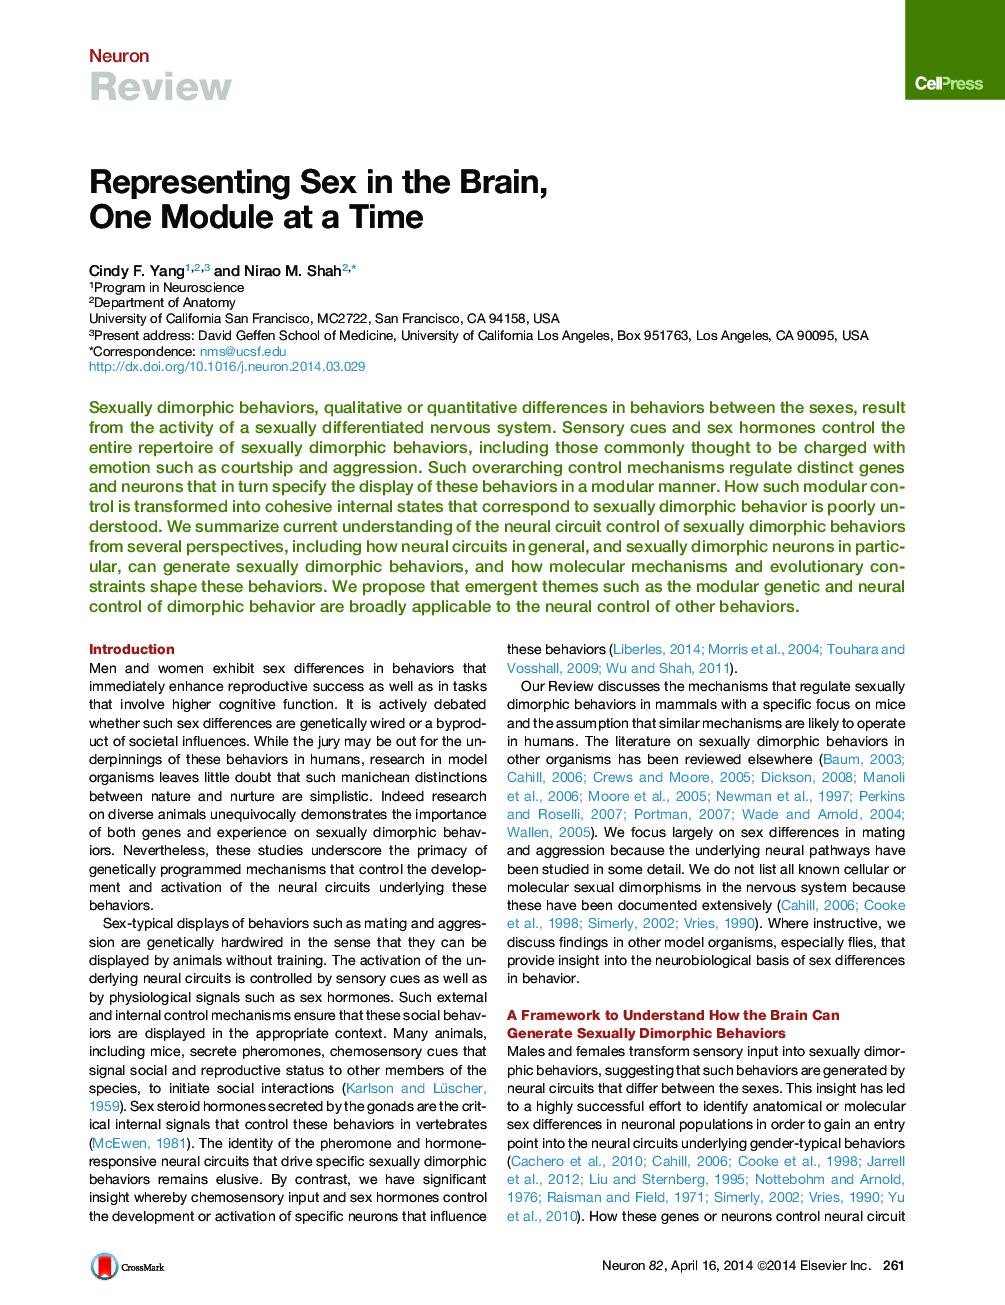 Representing Sex in the Brain, One Module at a Time